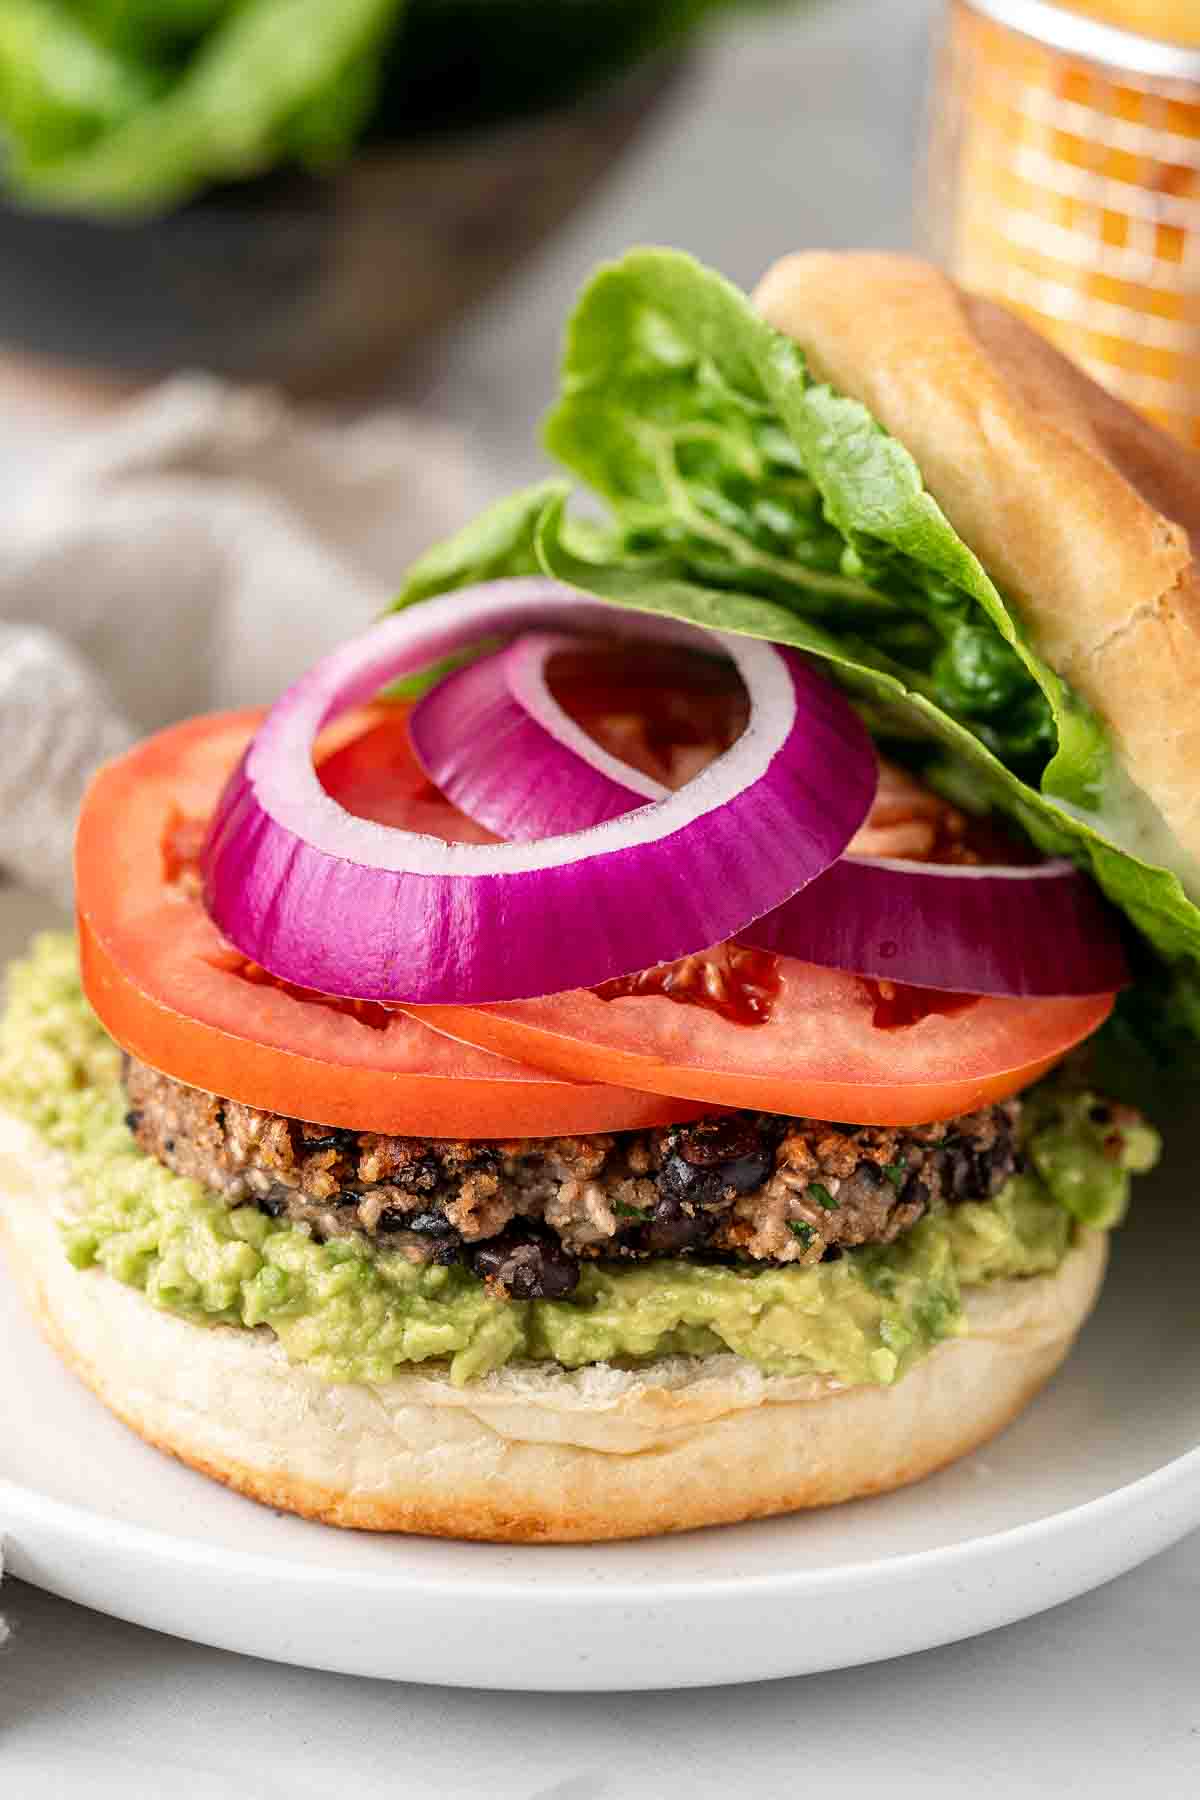 Sliced red onion and tomato on top of the vegan black bean burger.